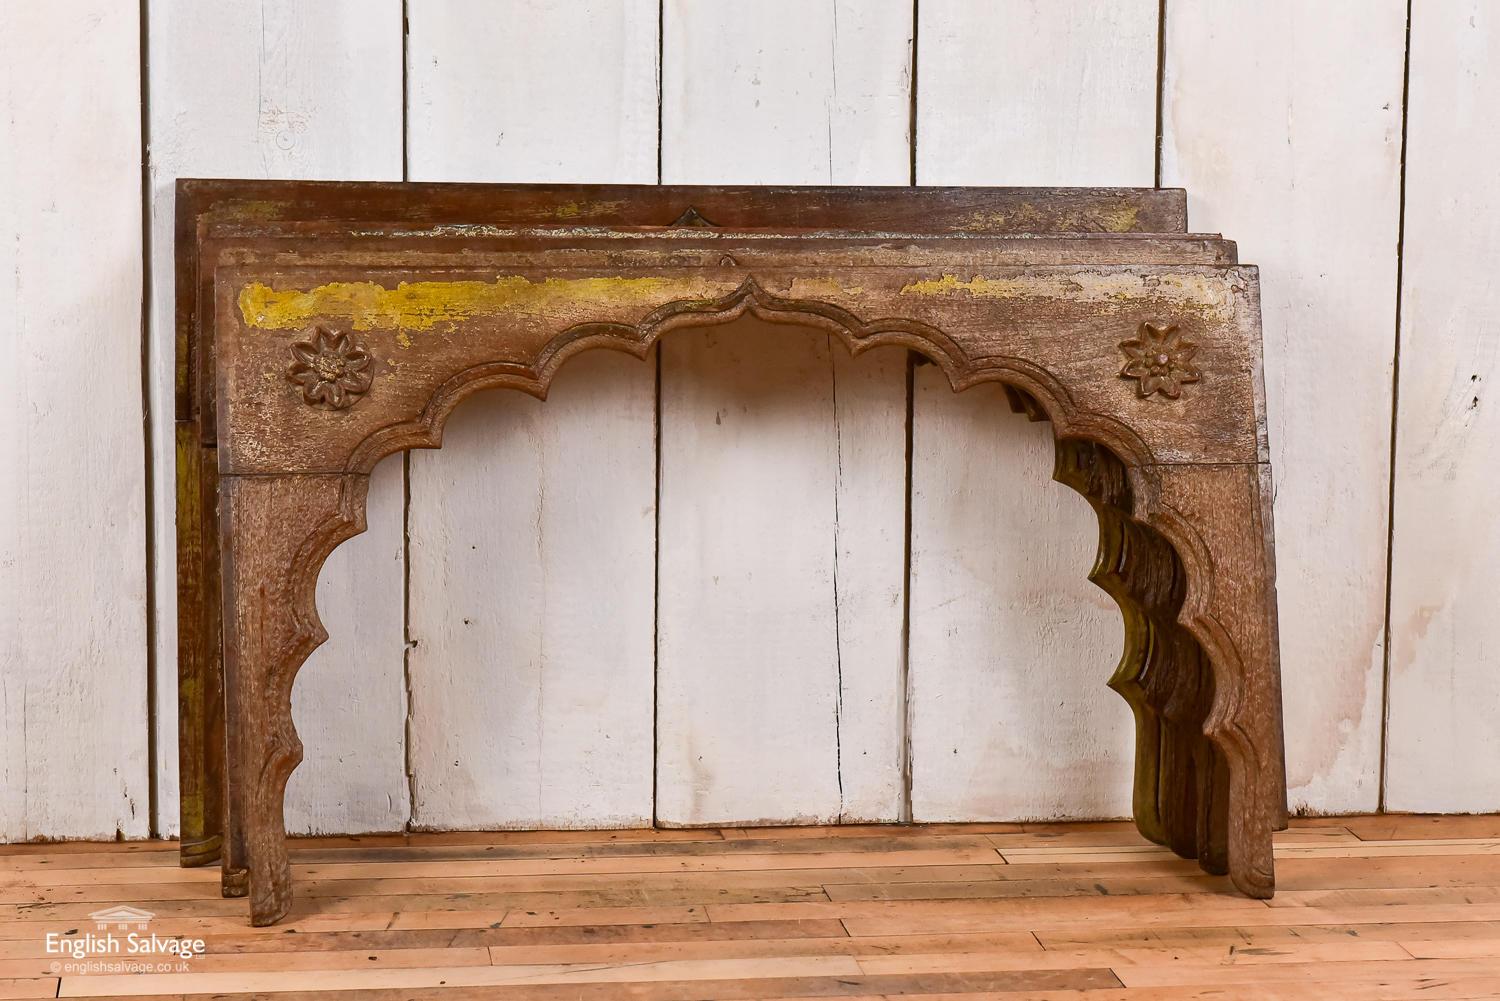 Reclaimed Indian hardwood Mihrab style arches with remnants of yellow paint and a simple flower motif to either side. There are some chips and scratches to the surface of the wood which together with the distressed paint finish, bring an attractive